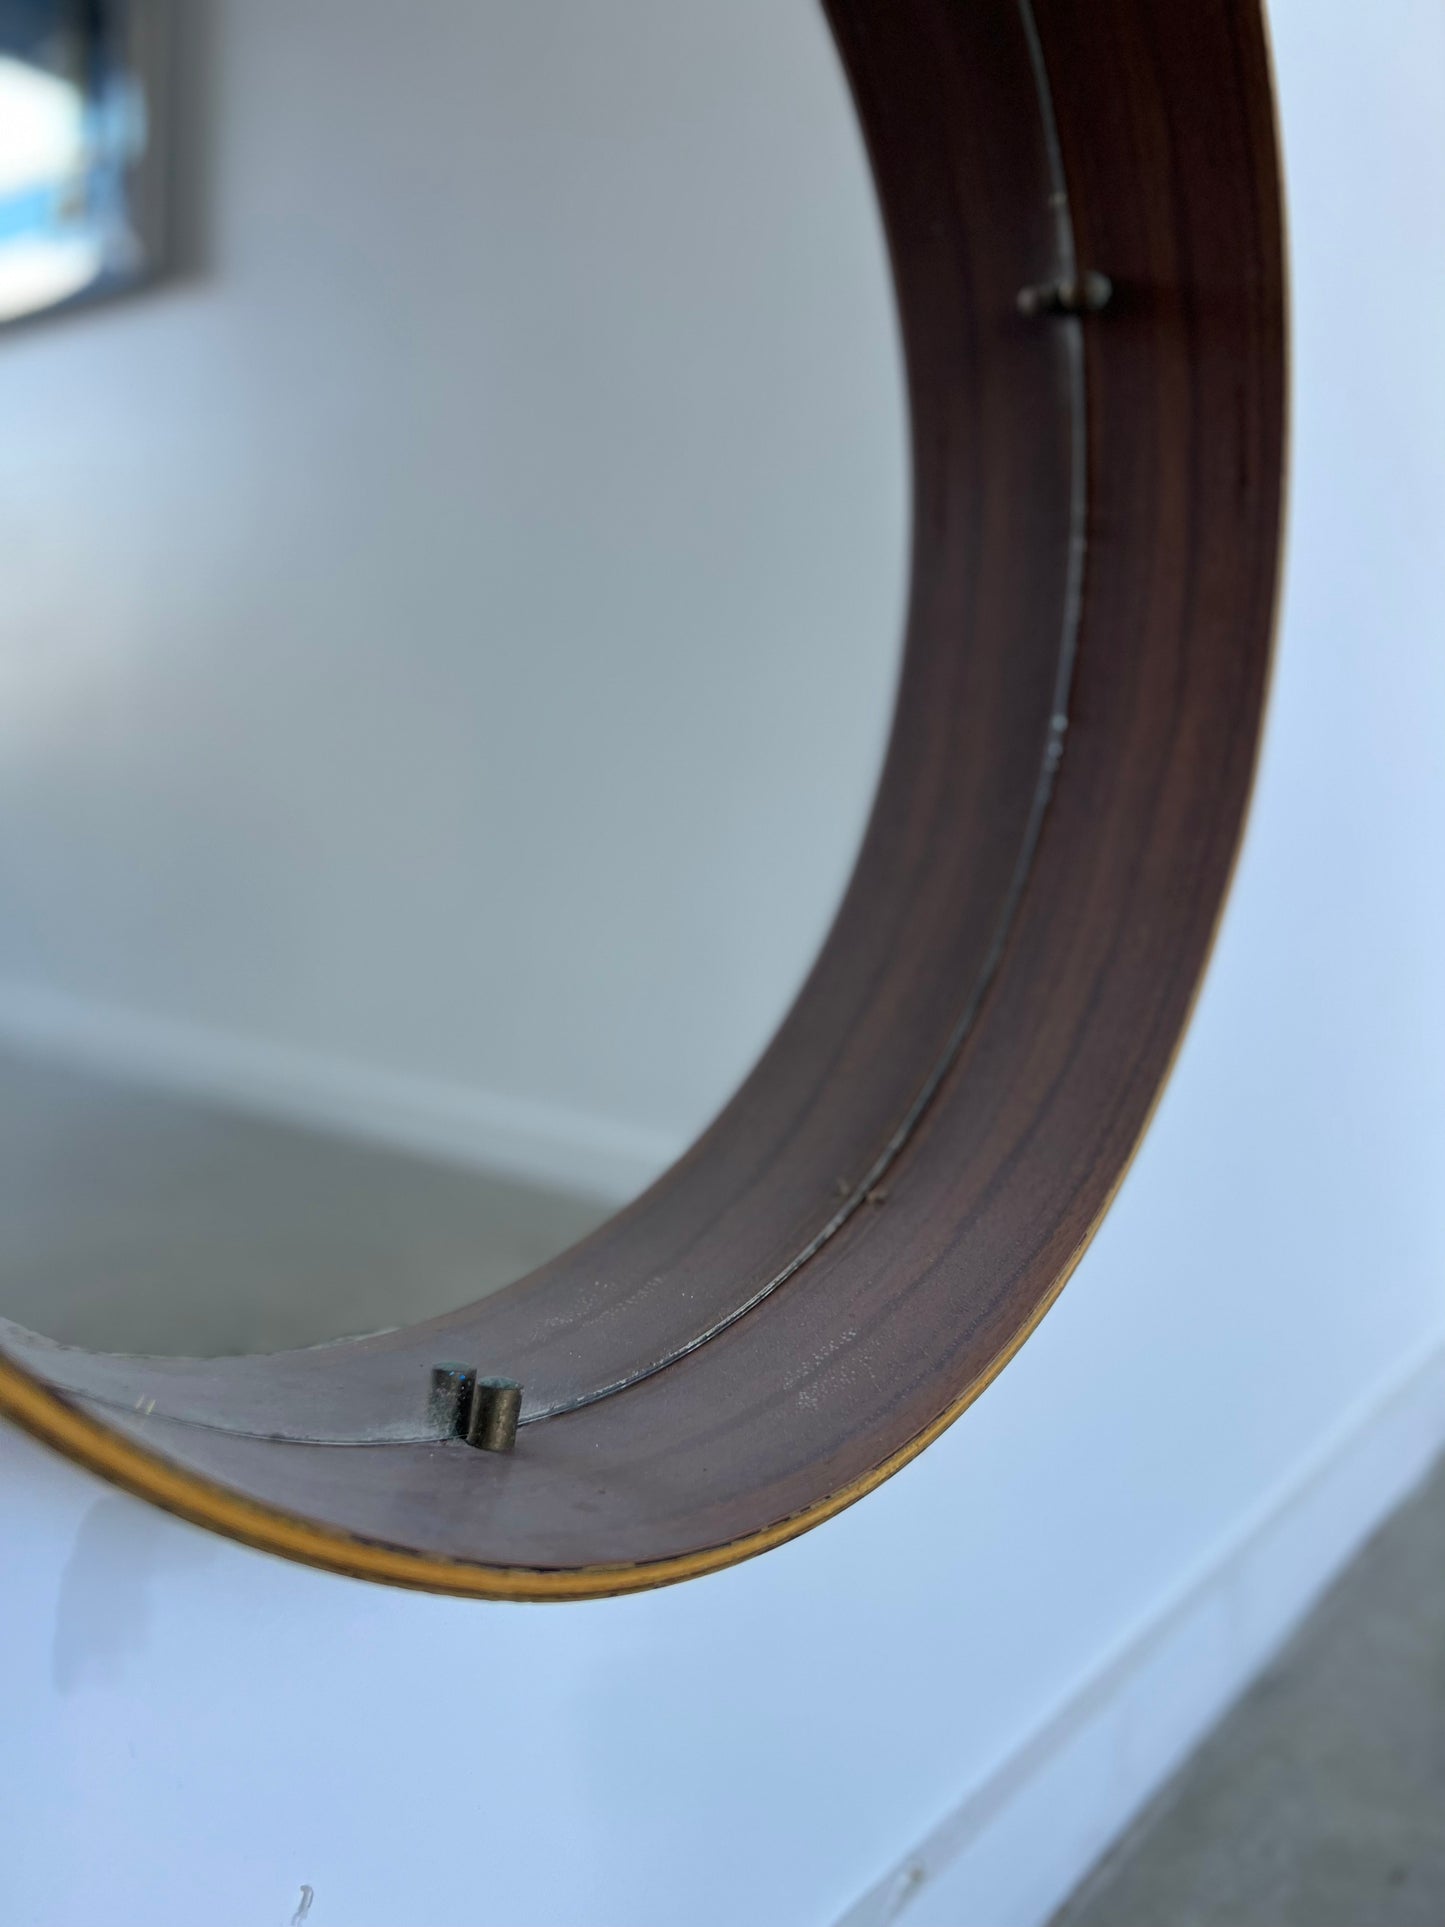 Mid Century Modern Italian Round Wall Mirror with Rosewood Frame, 1950s